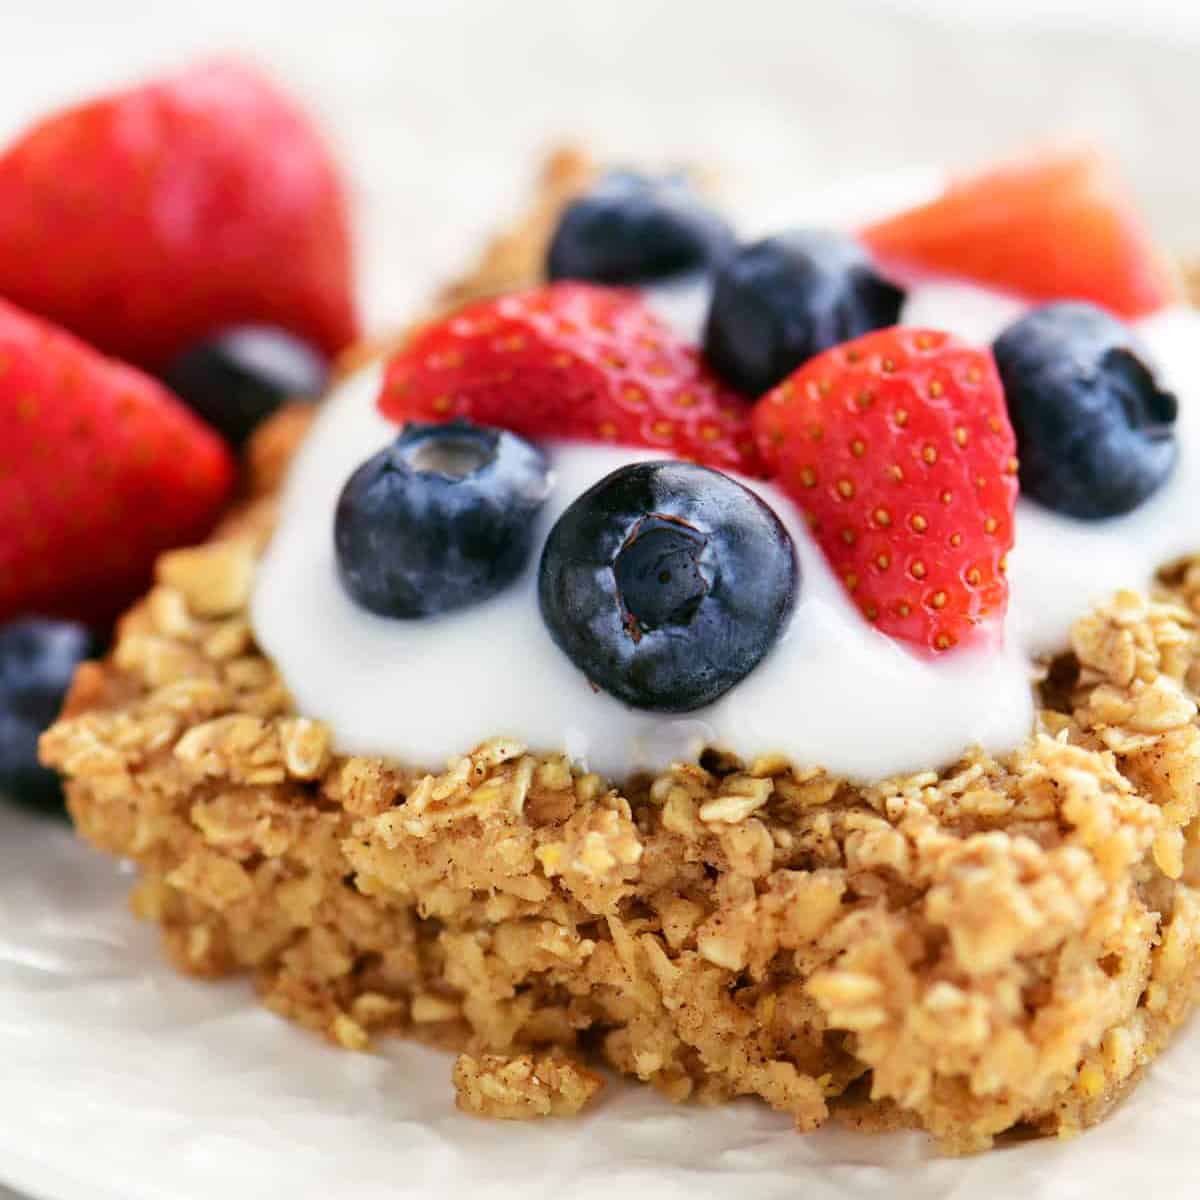 baked oatmeal with fruit on top.